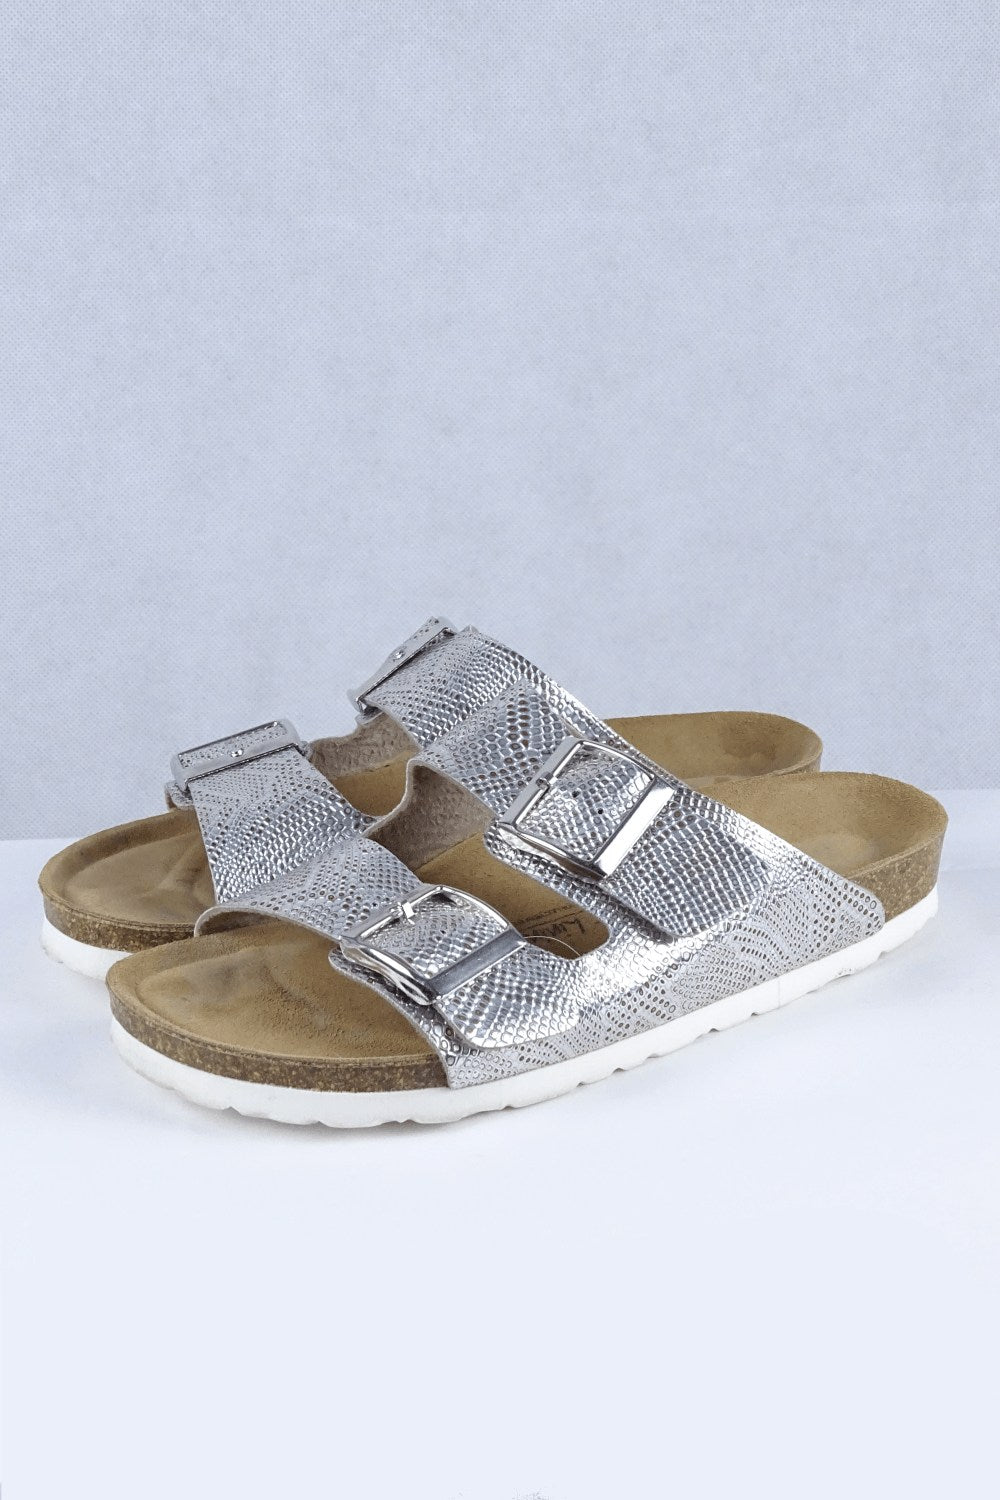 Silver Lining Shoes Silver 6 AU